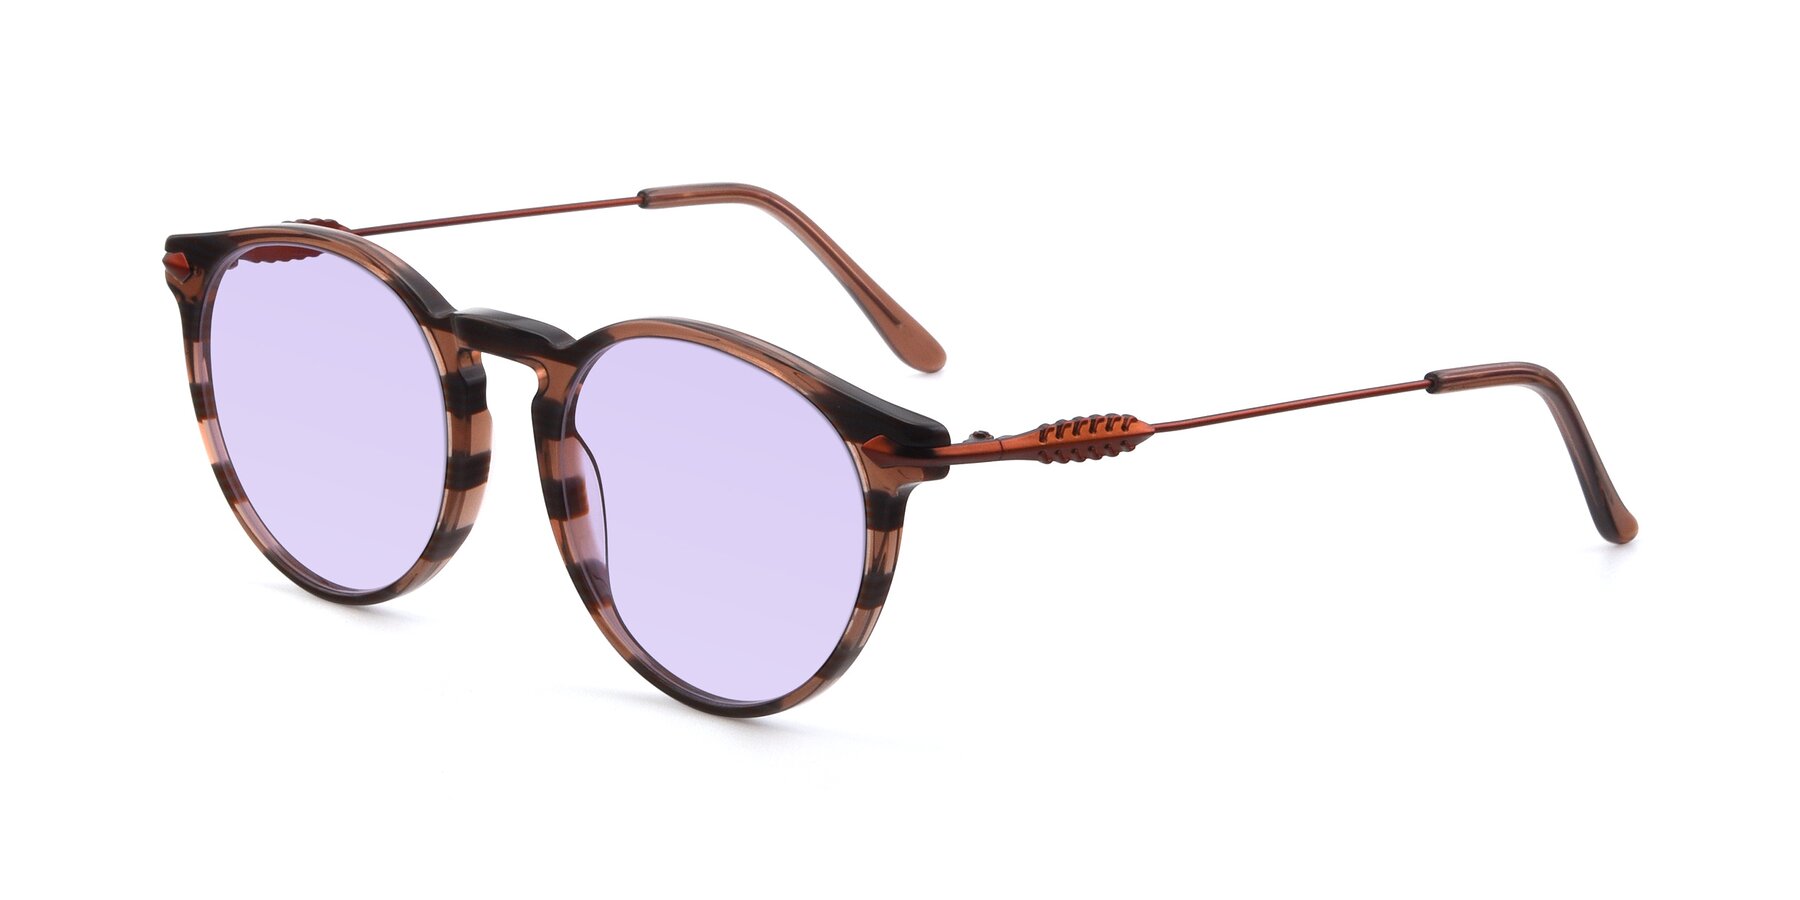 Angle of 17660 in Stripe Brown with Light Purple Tinted Lenses